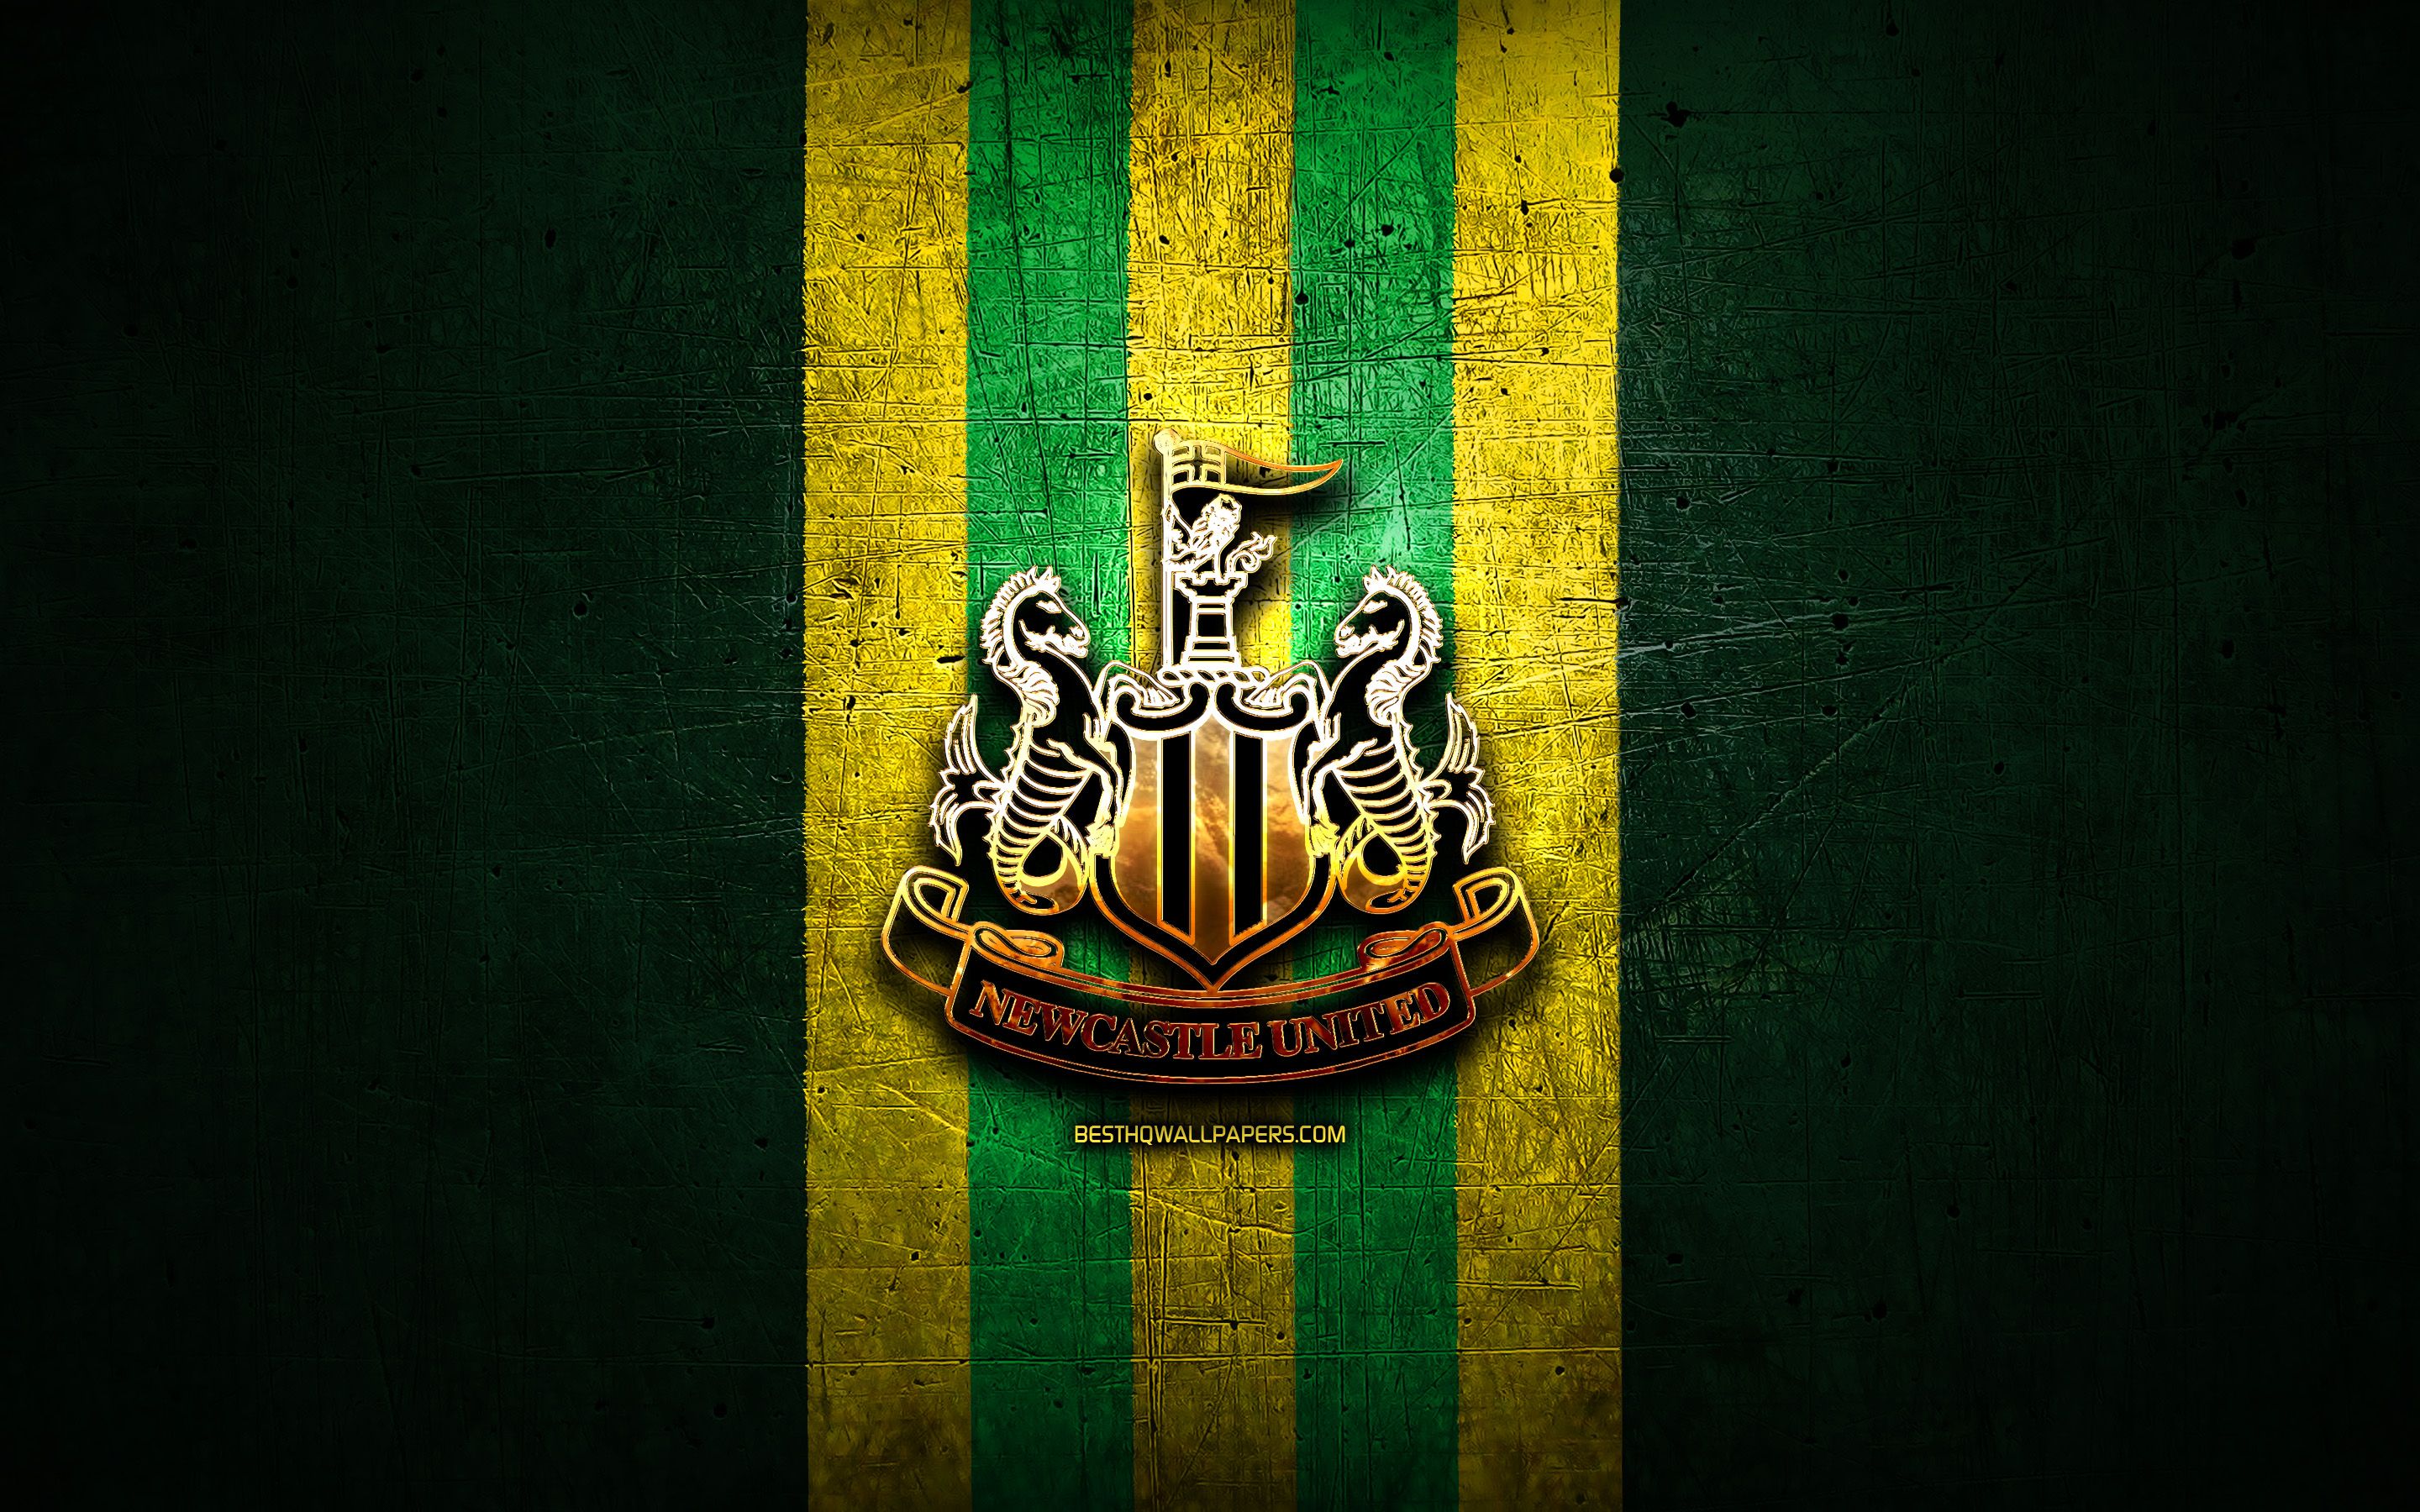 Download wallpaper Norwich City FC, golden logo, Premier League, green metal background, football, Norwich City, english football club, Norwich City logo, soccer, England for desktop with resolution 2880x1800. High Quality HD picture